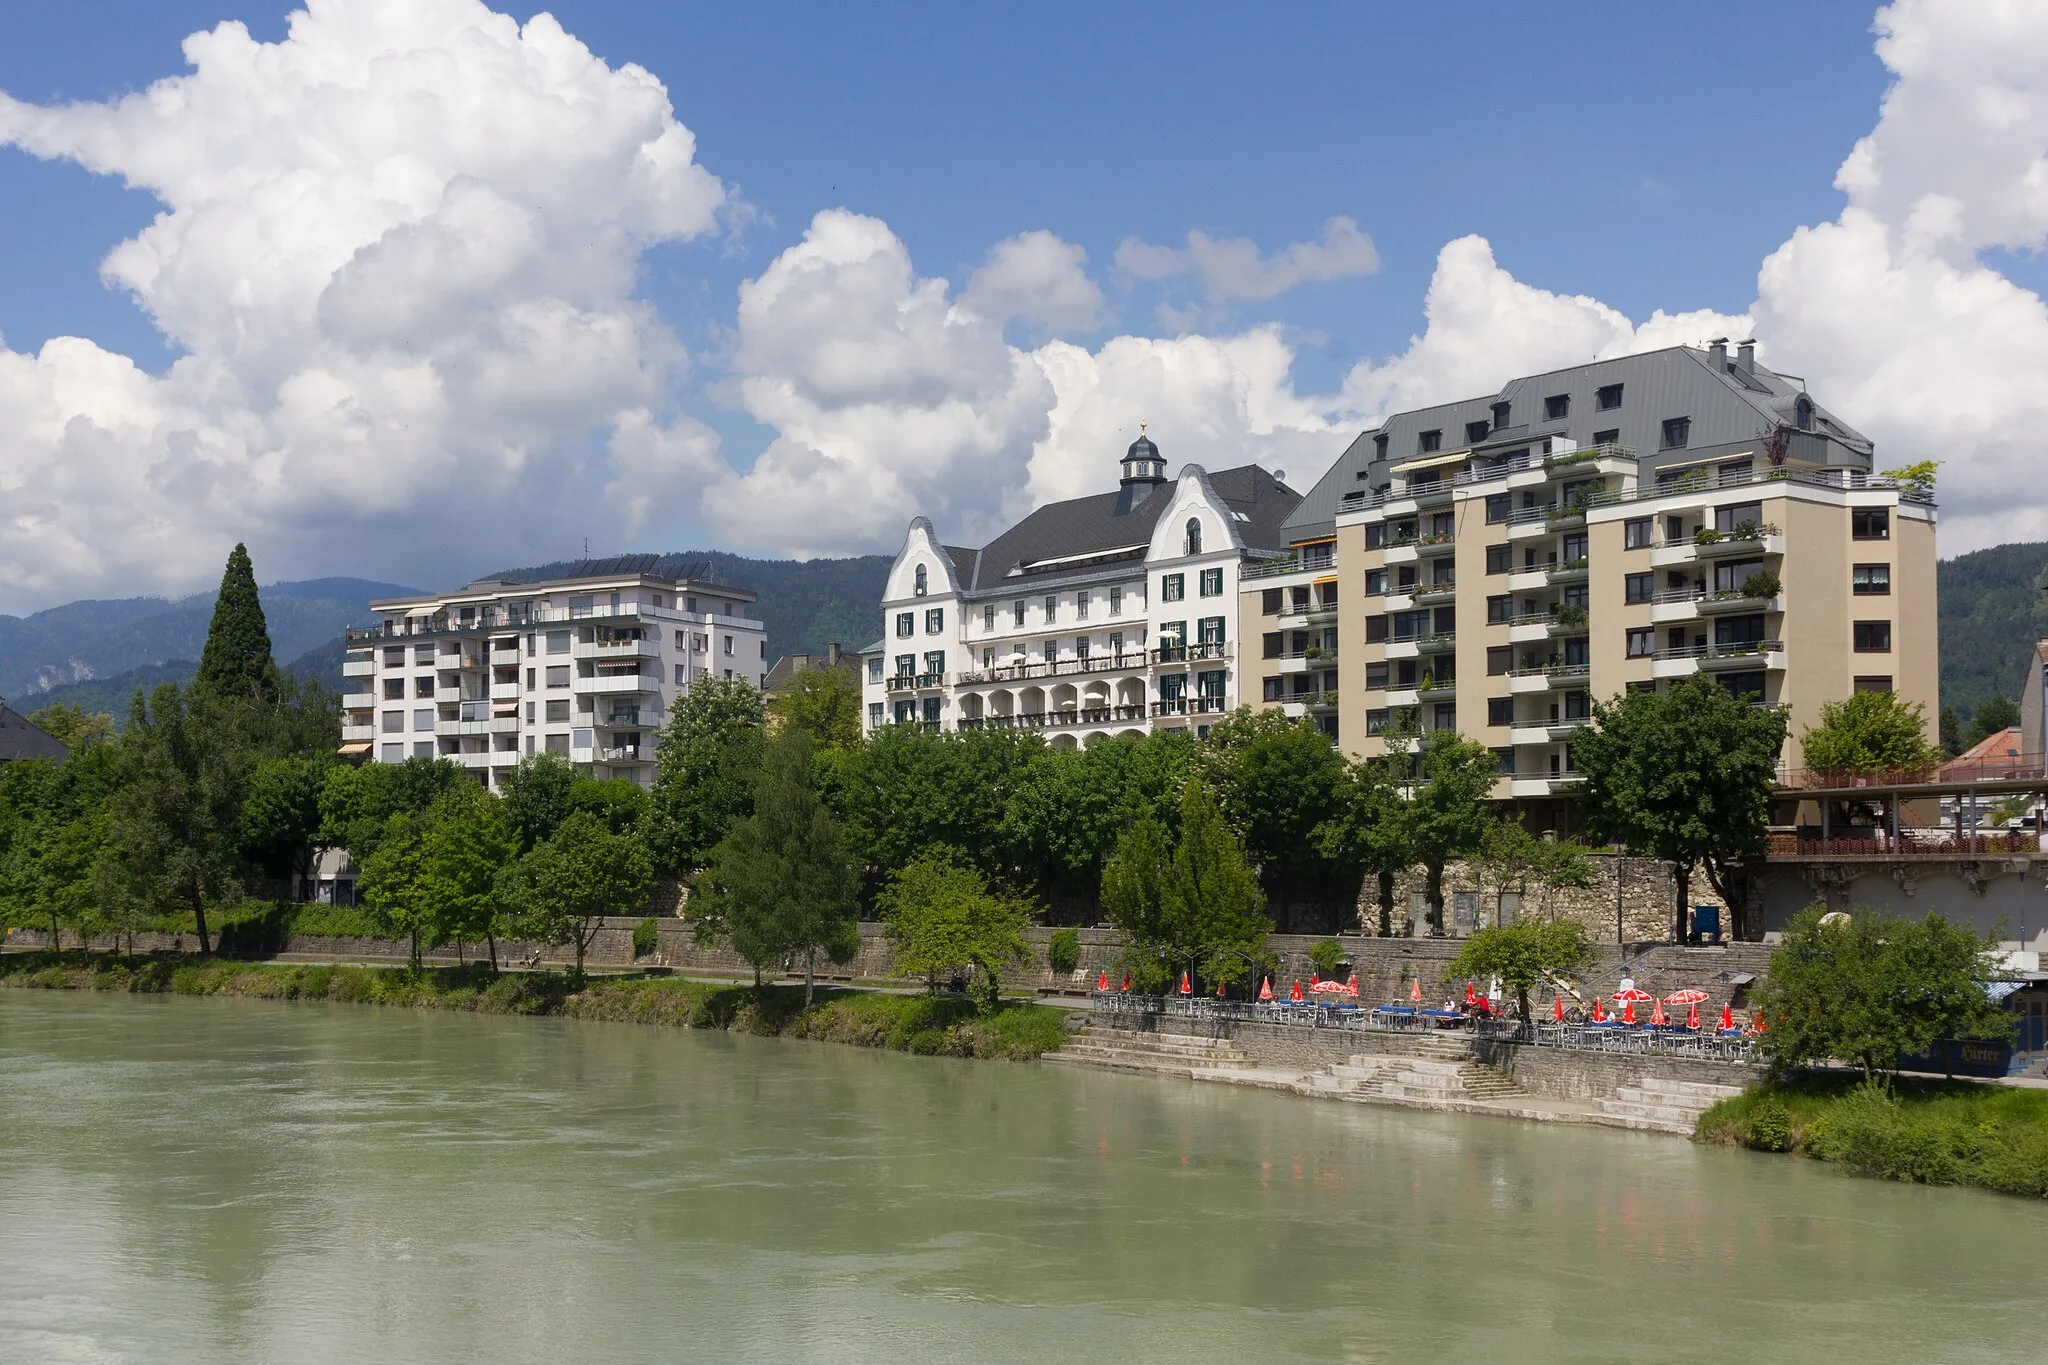 Photo showing: Buildings on Draupromenade in Villach